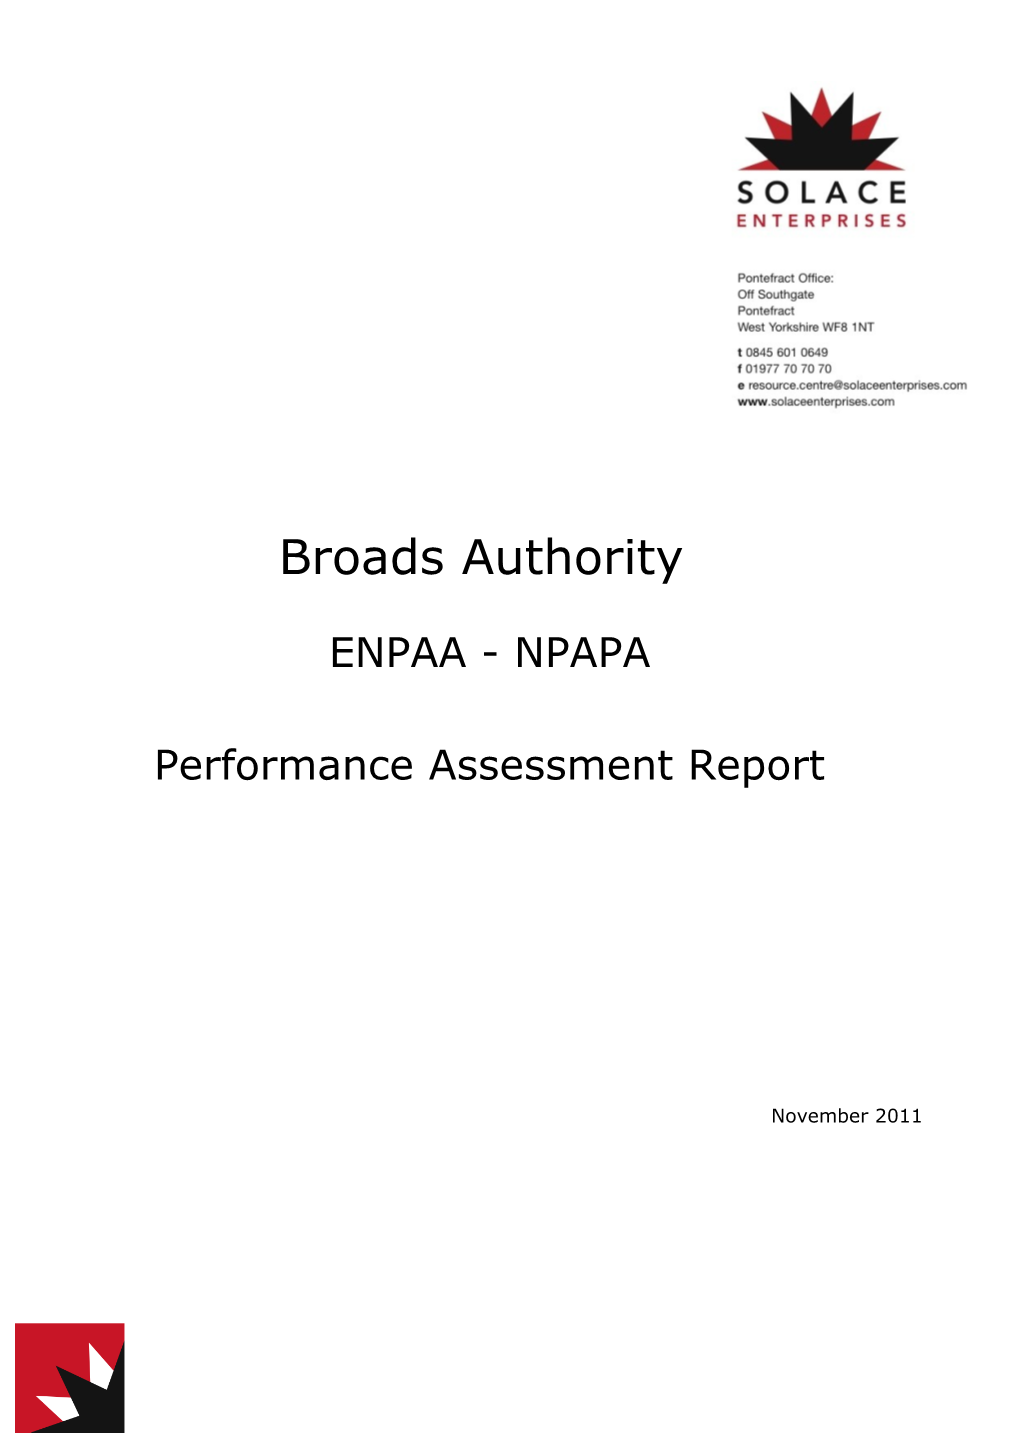 3The Broads Authority Performance Assessment Process 4